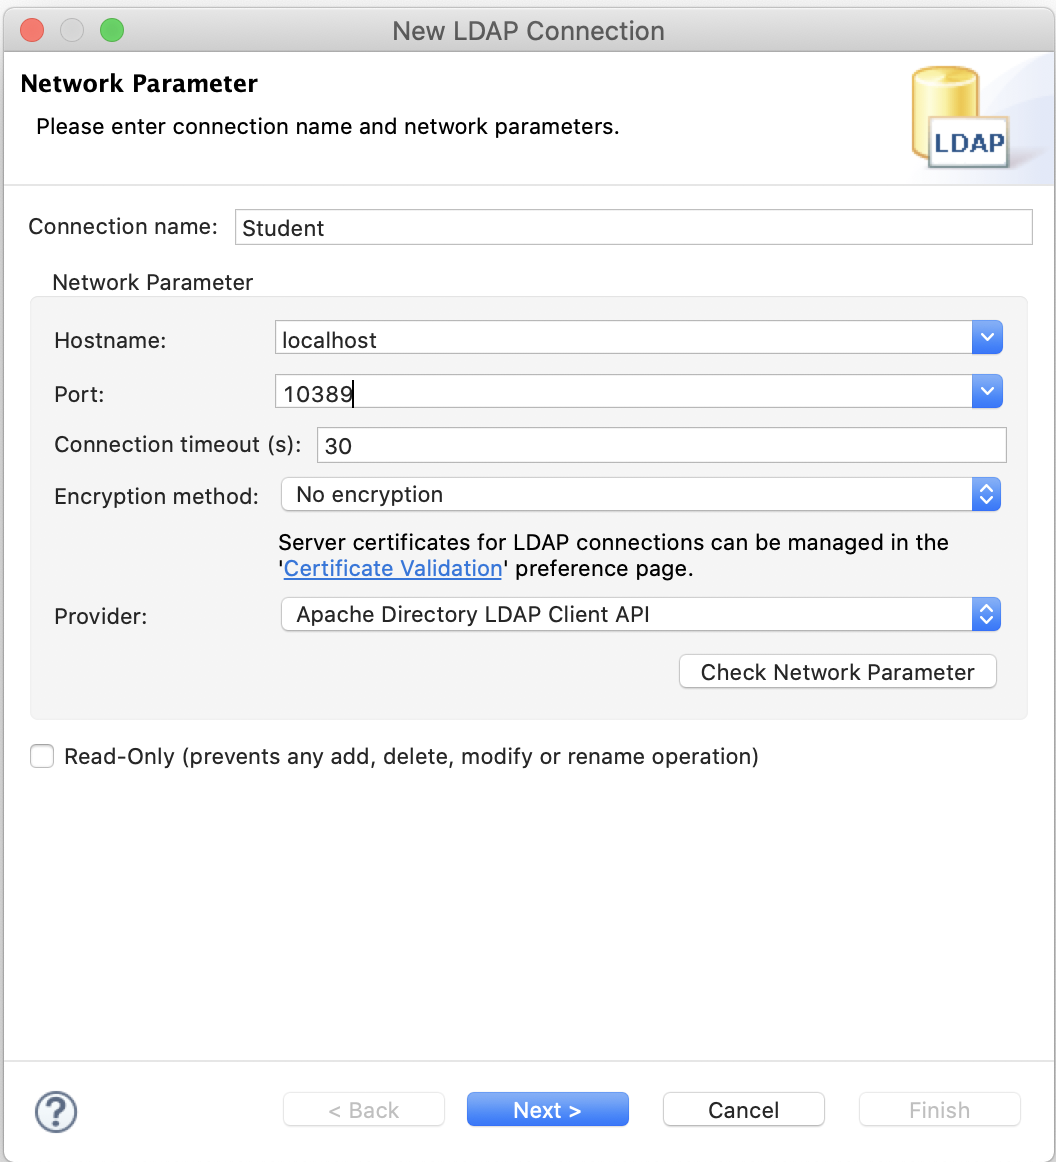 LDAP new connection